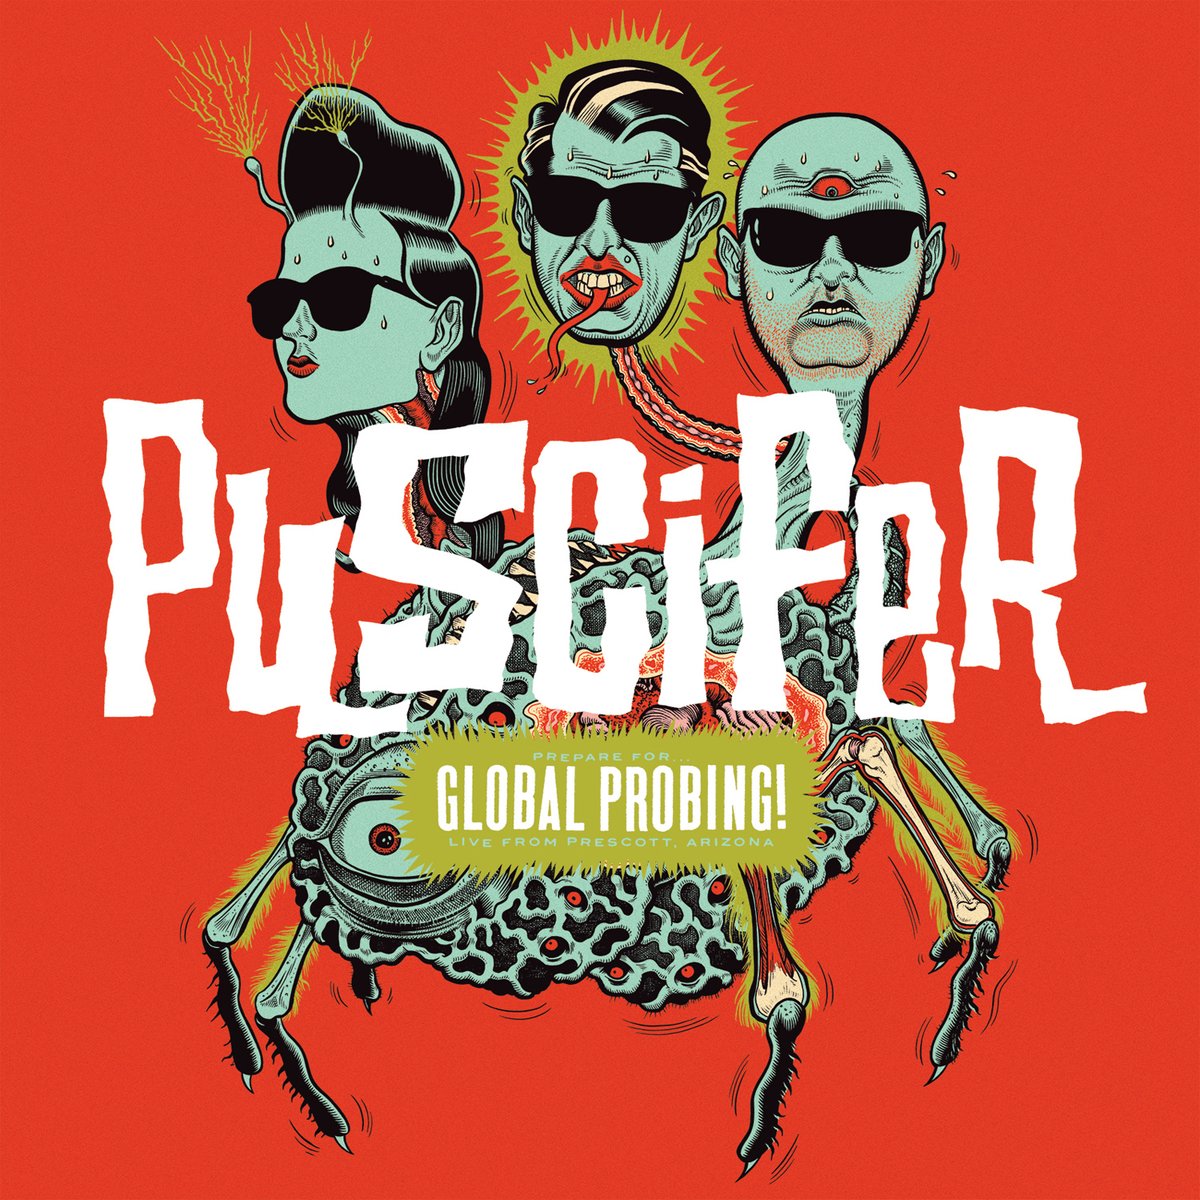 The “Global Probing” soundtrack is out now on vinyl & CD/Blu-Ray. The ltd-edition 2LP release features 16 songs, recorded live in Prescott, AZ during the Existential Reckoning tour. 🛸 Visit Puscifer.com, indie record stores or @Revolvermag to grab it while you can. 👽